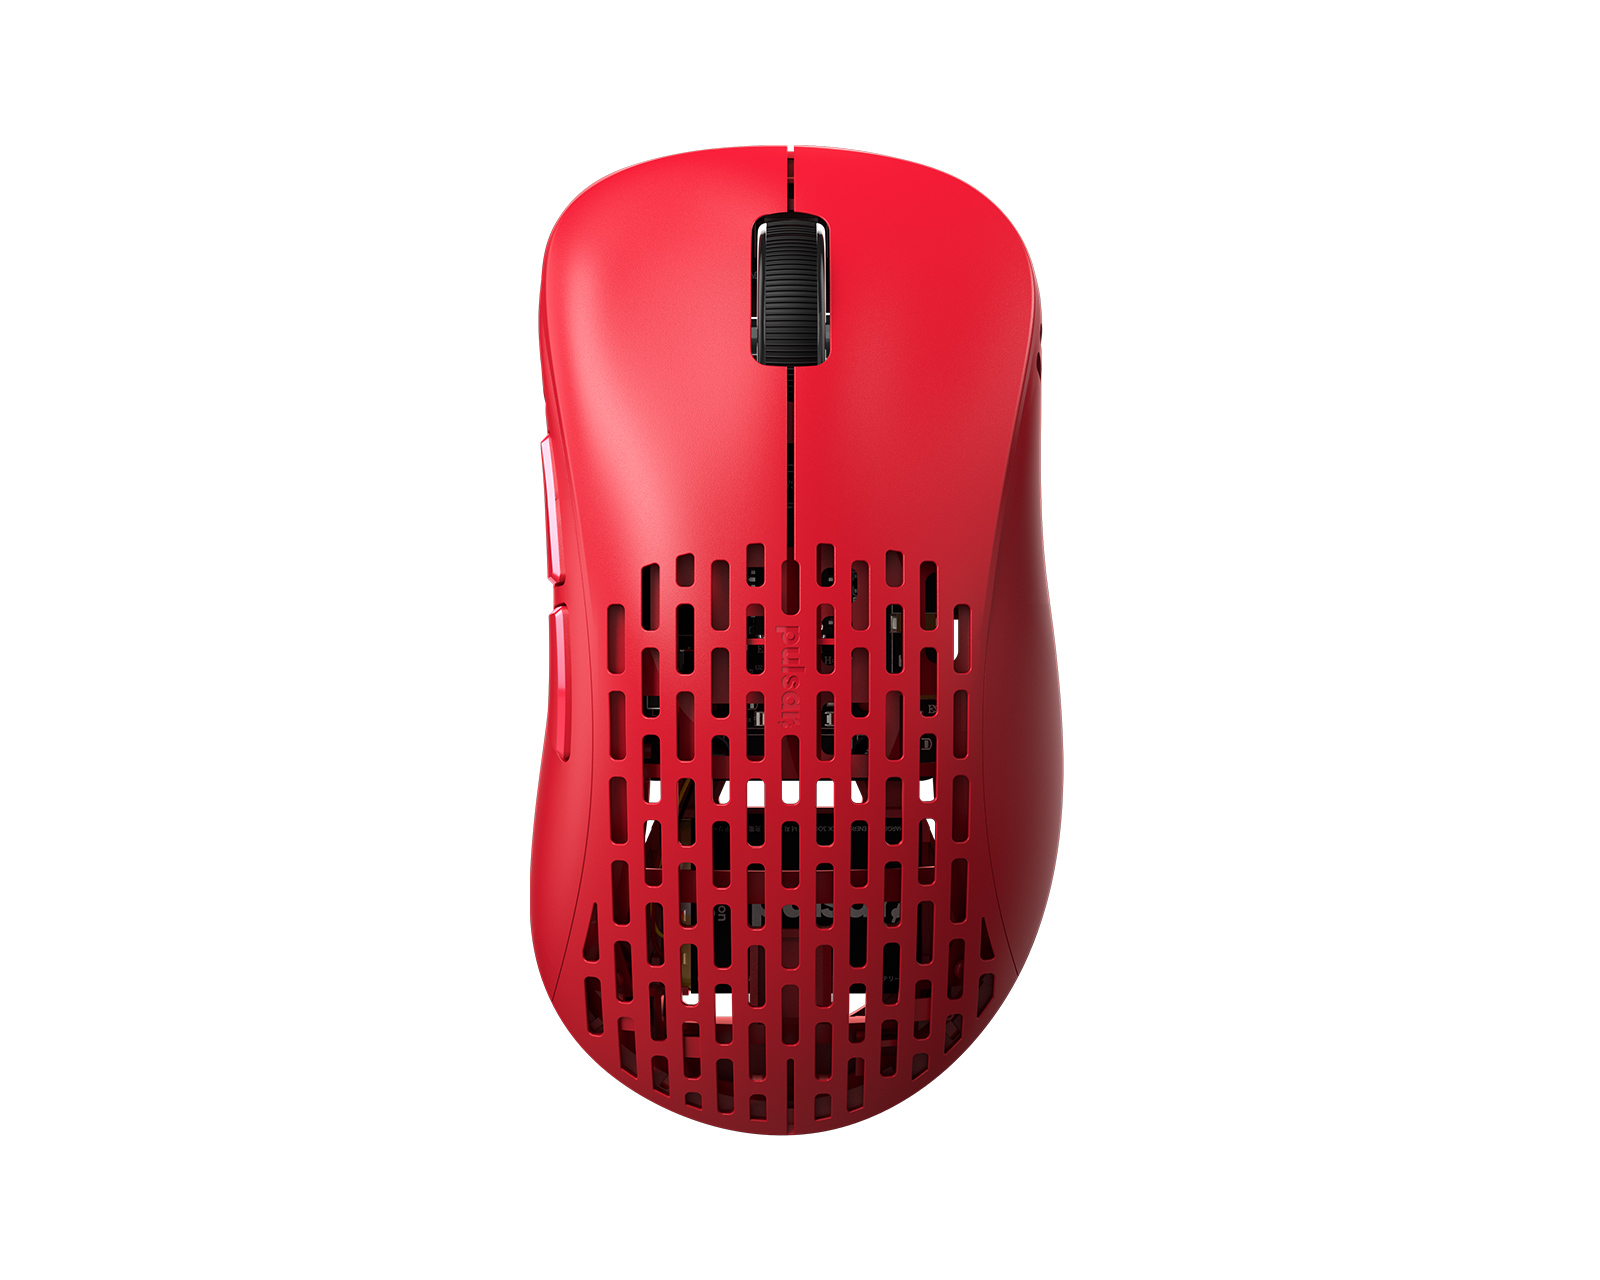 tælle mad Zoo om natten Pulsar Xlite Wireless v2 Mini Gaming Mouse - Red - Limited Edition -  us.MaxGaming.com